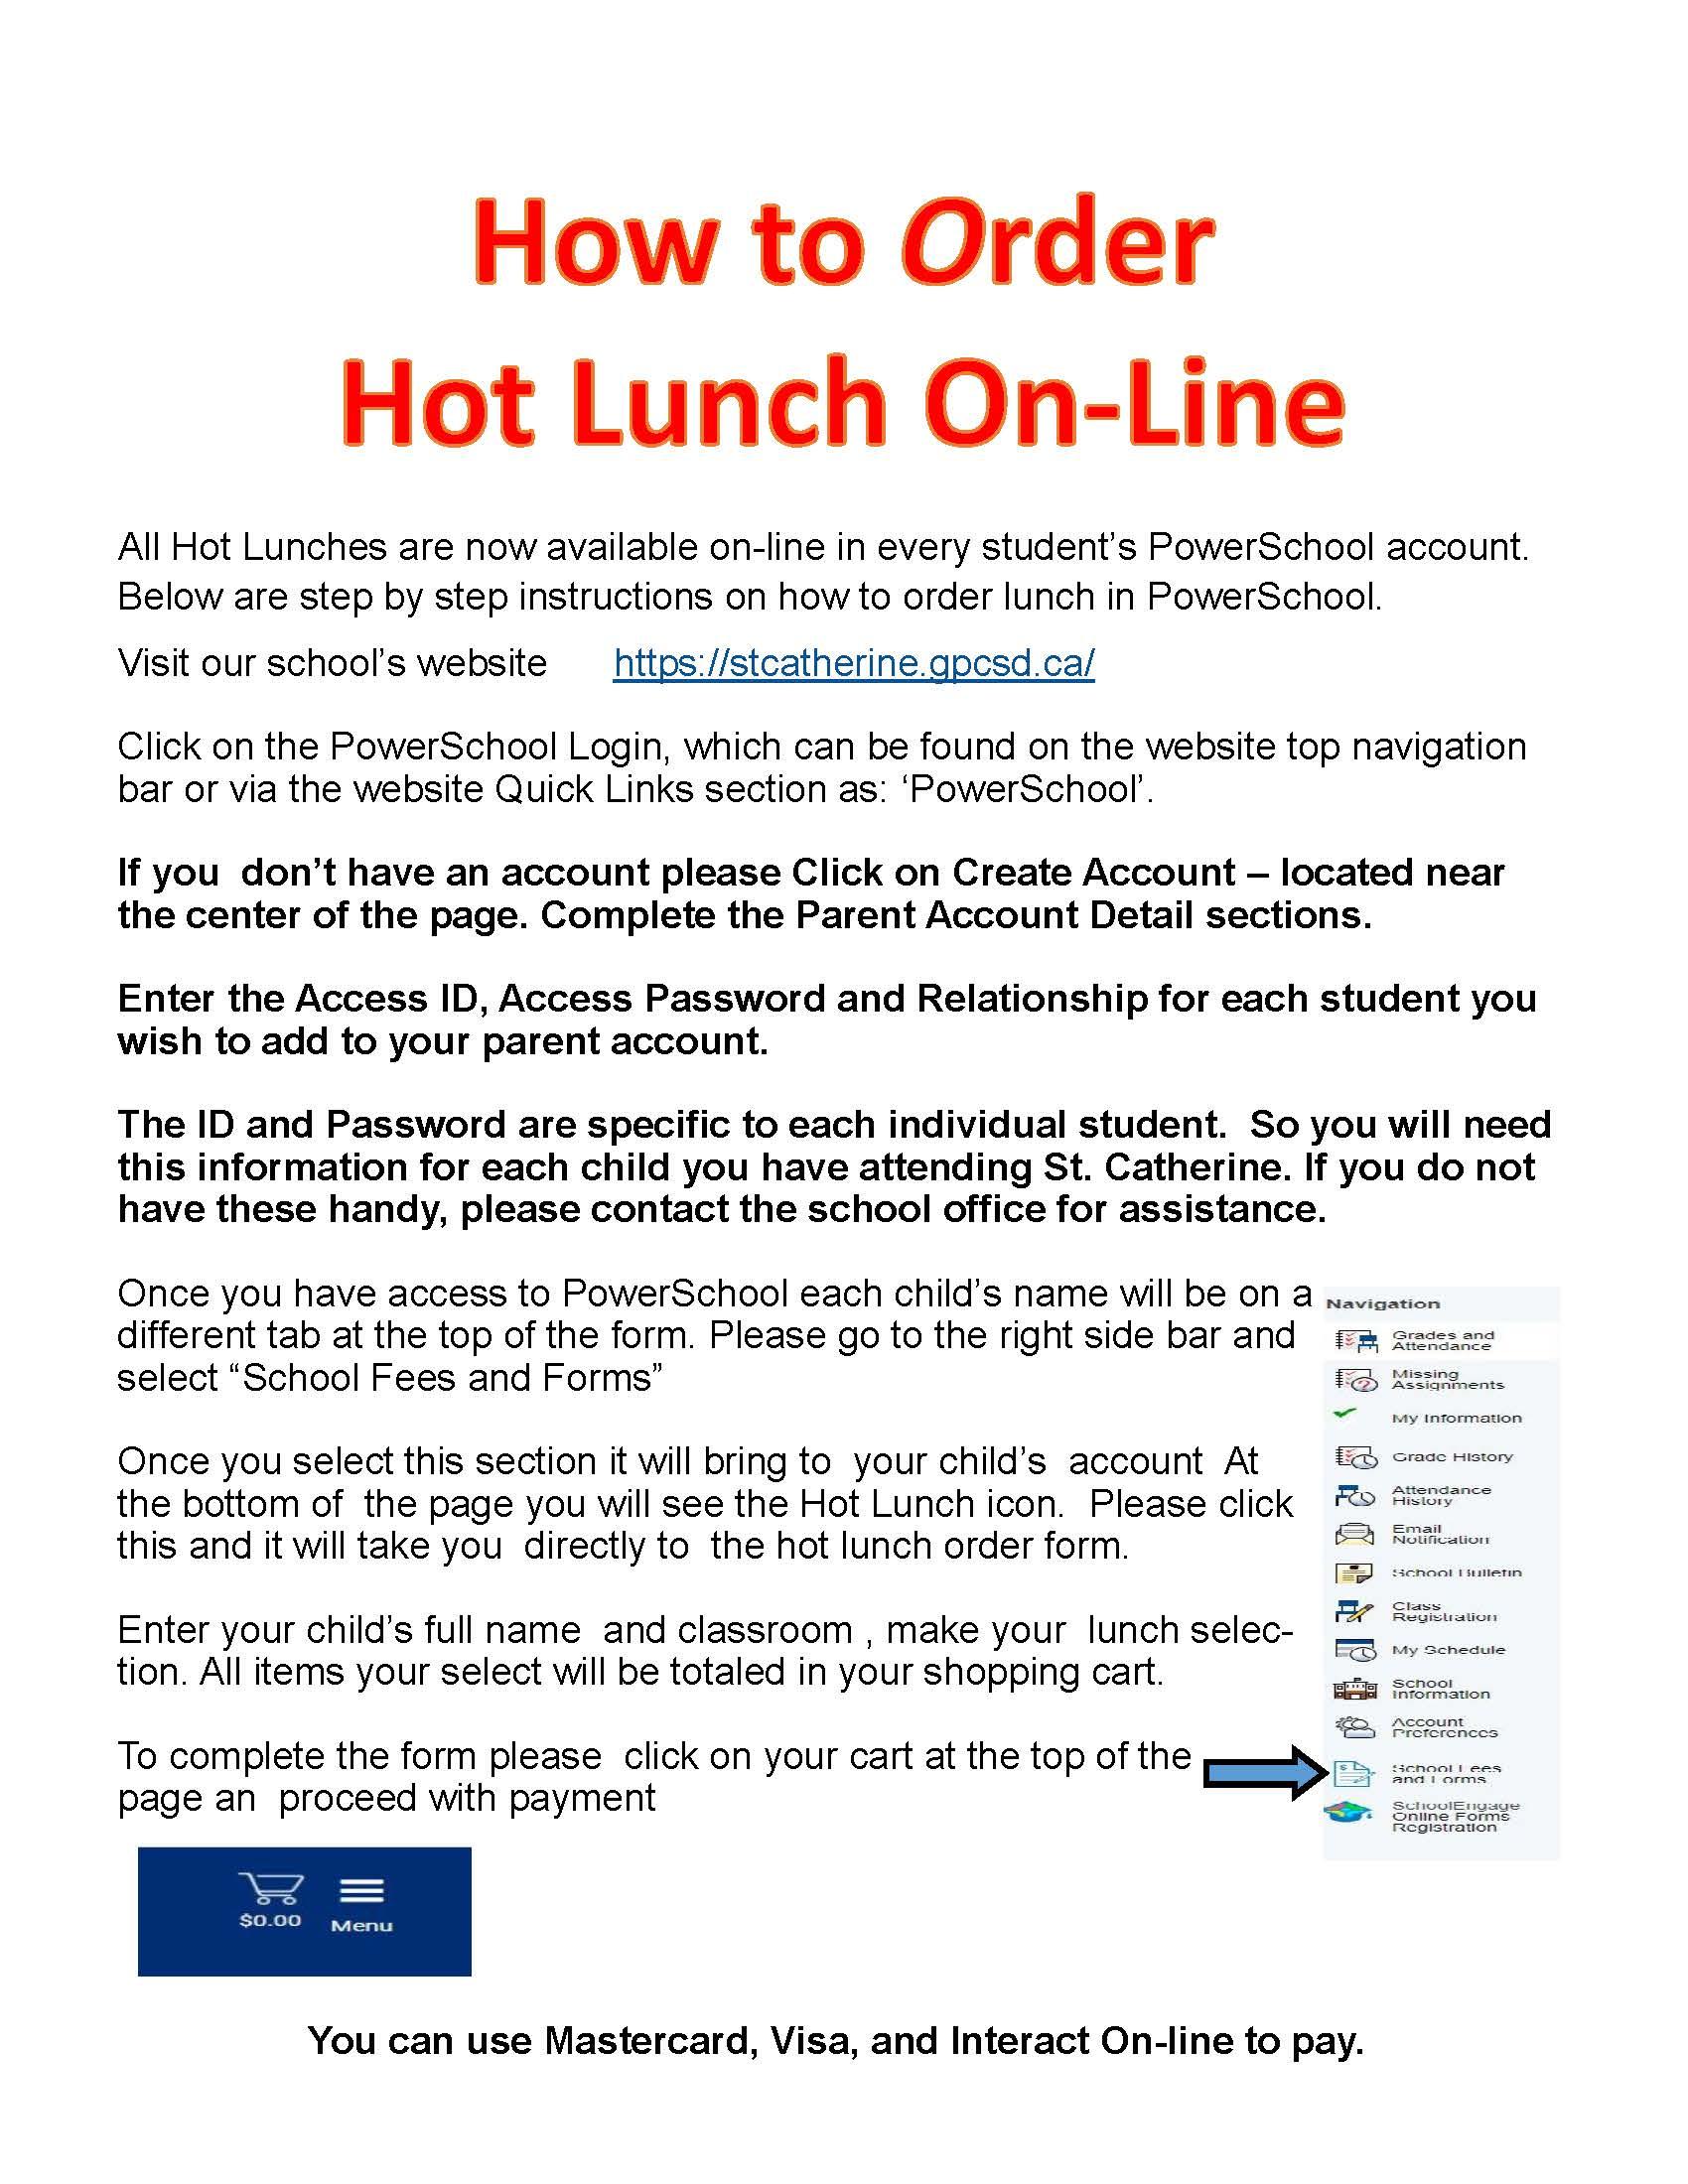 How to access hot lunch on powerschool